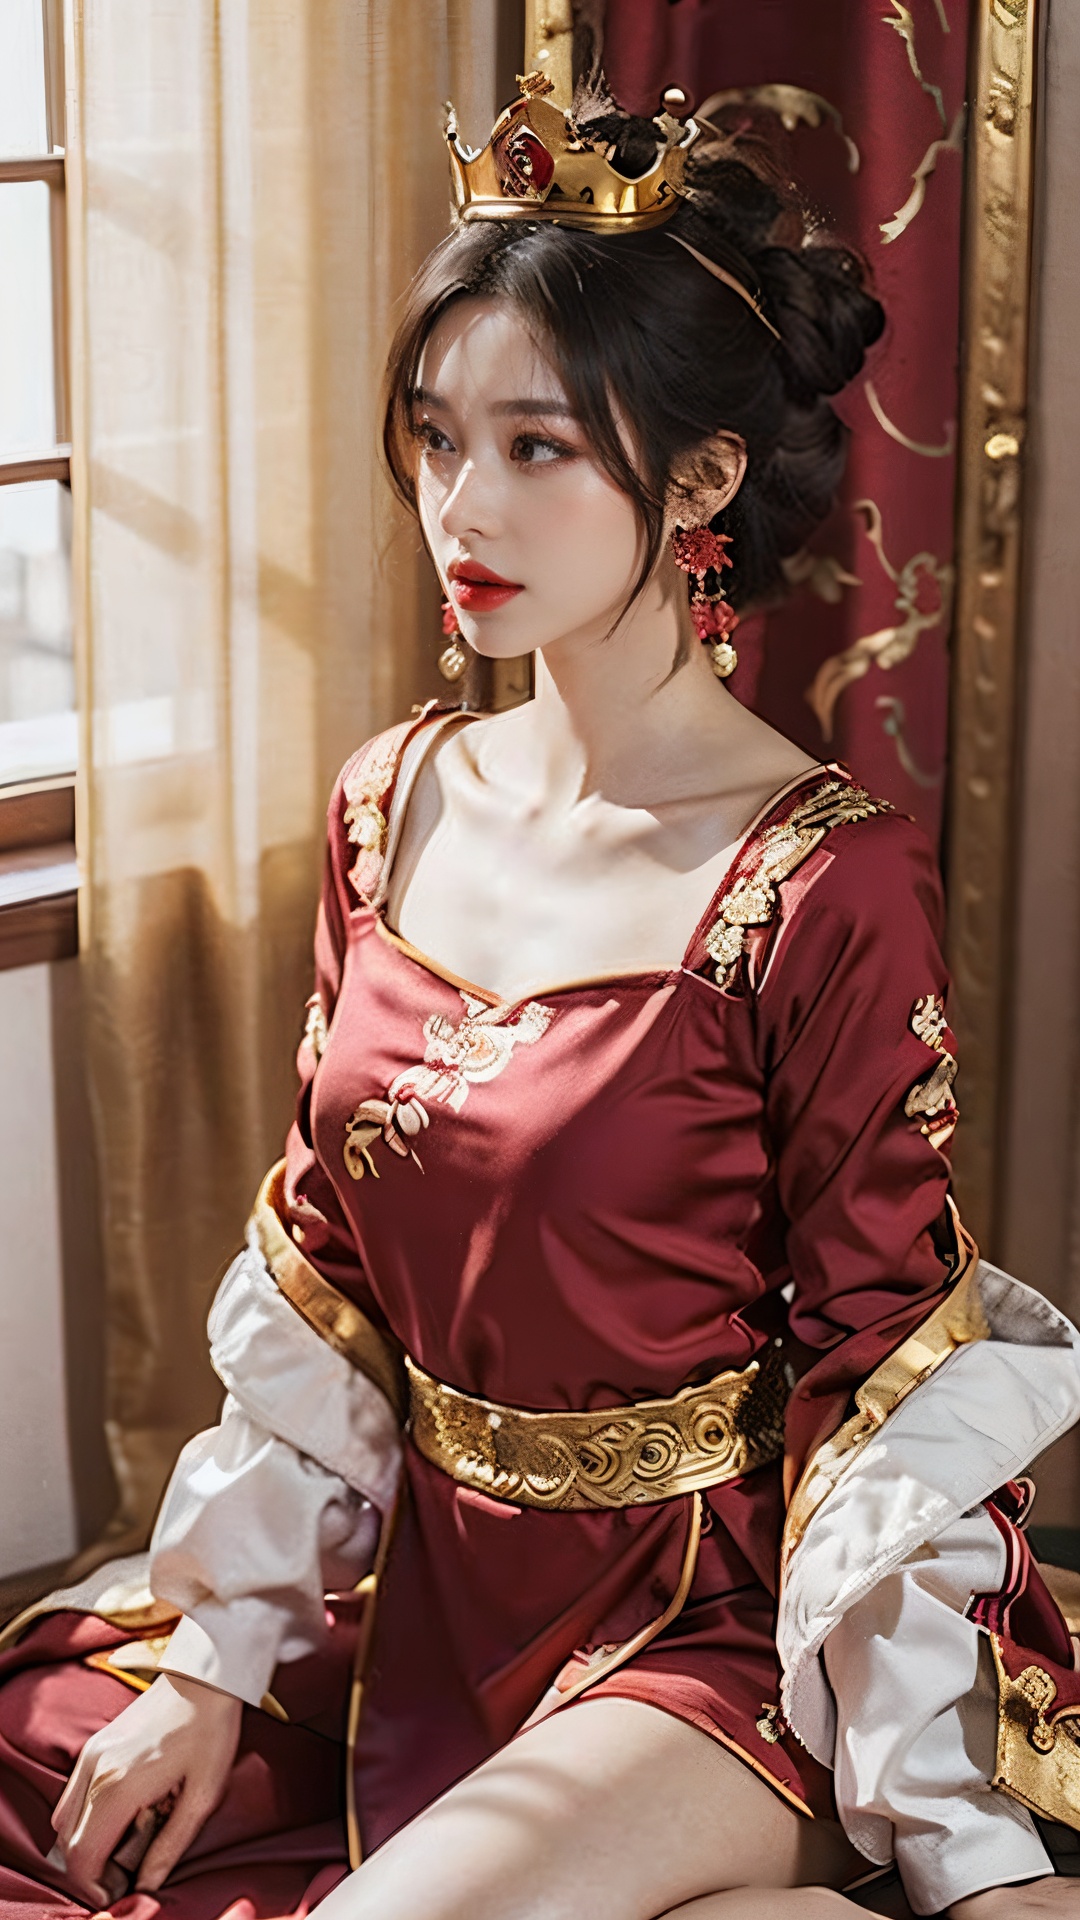 (Best quality: 1.1), (Realistic: 1.1), (Photography: 1.1), (highly details: 1.1), A woman wears a red and gold dress,Woman with a crown on her head, A hair stick,Delicate face, (sitting on red bed),black_Hair, crown, Looking down, (2 red candles), Chinese_clothes, Curtains, Earrings, Hair_decorations, Hanfu, interiors, jewelry, Long_Sleeves, Red dress, Redlip, nipple tassels, (Red quilt), (red palace: 1.2), (3DMM: 1.5),mix4,red and gold dress,qingse